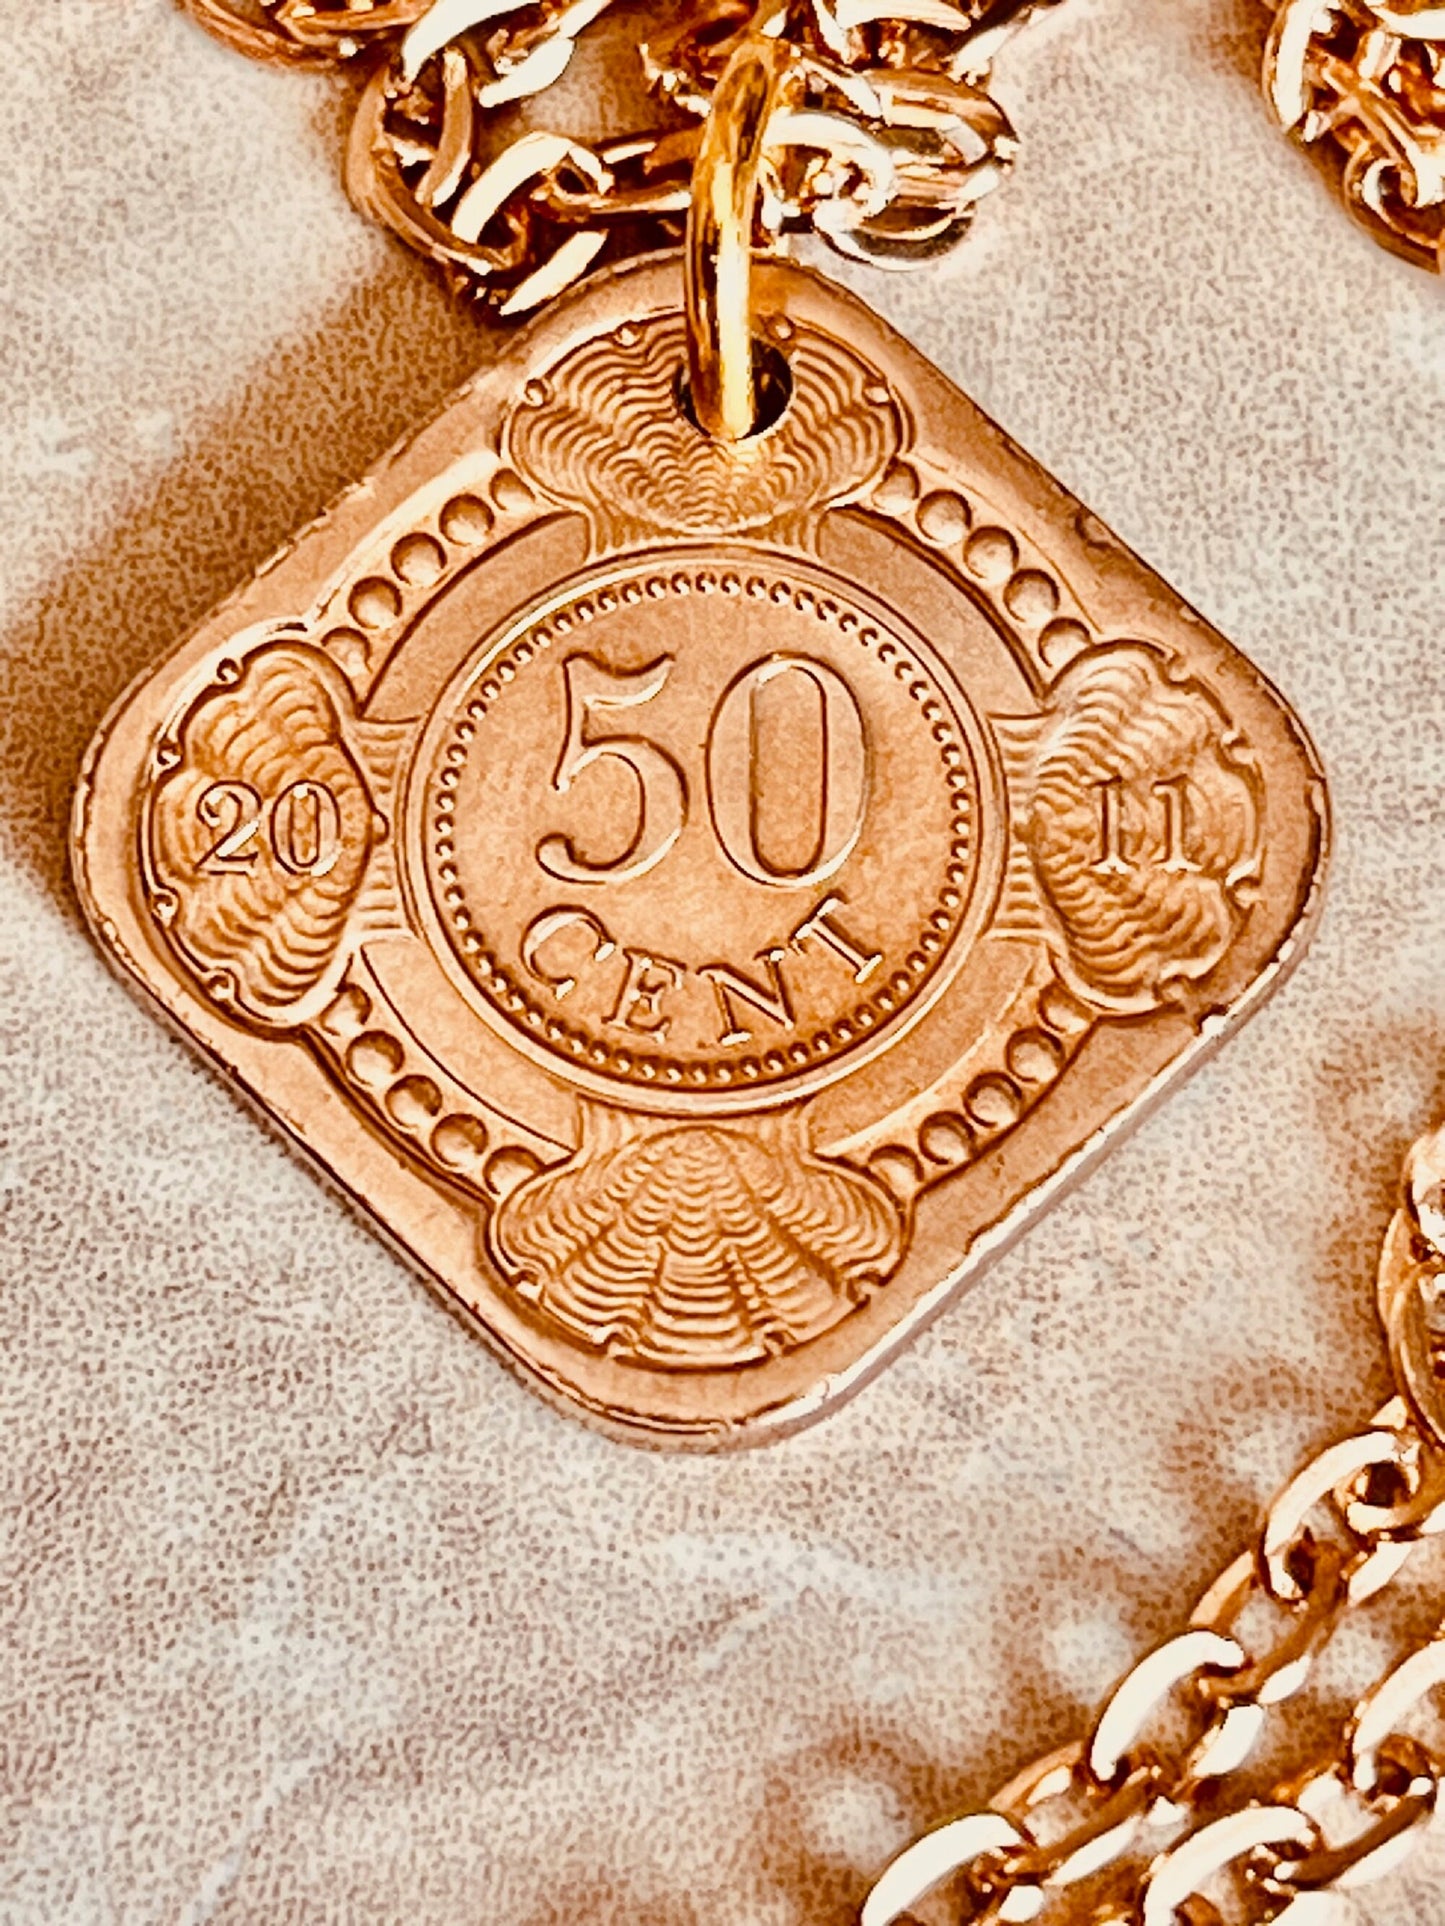 Netherland Coin Pendant Antilles 50 Cents Gulden Necklace Jewelry Gift For Friend Coin Charm Gift For Him, Her, World Coins Collector